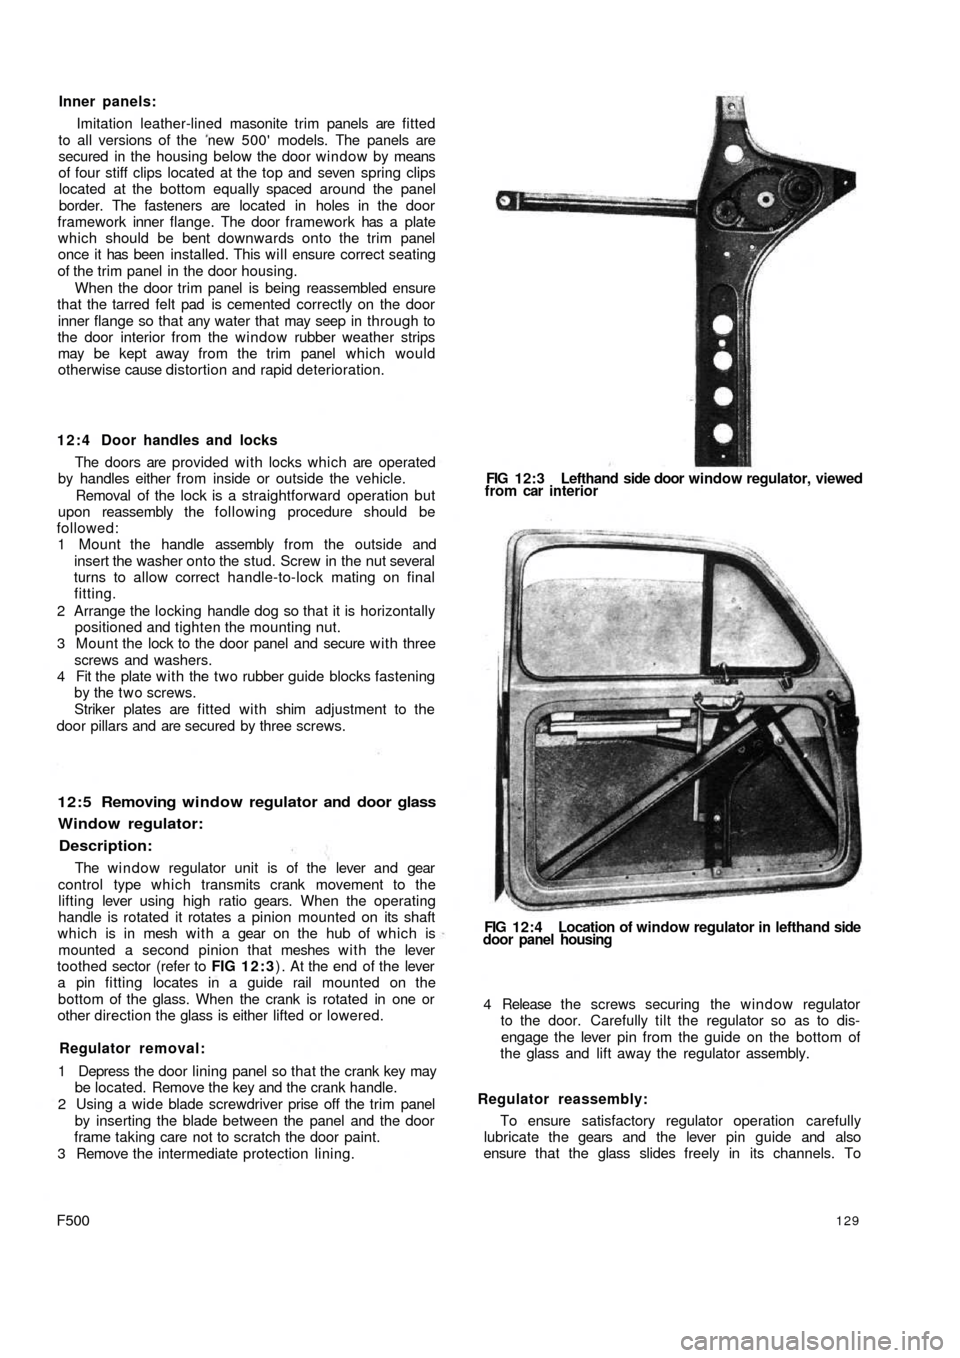 FIAT 500 1971 1.G Workshop Manual Inner panels:
Imitation leather-lined masonite trim panels are fitted
to all versions of the  new 500 models. The panels are
secured in the housing below the door window by means
of four stiff clips 